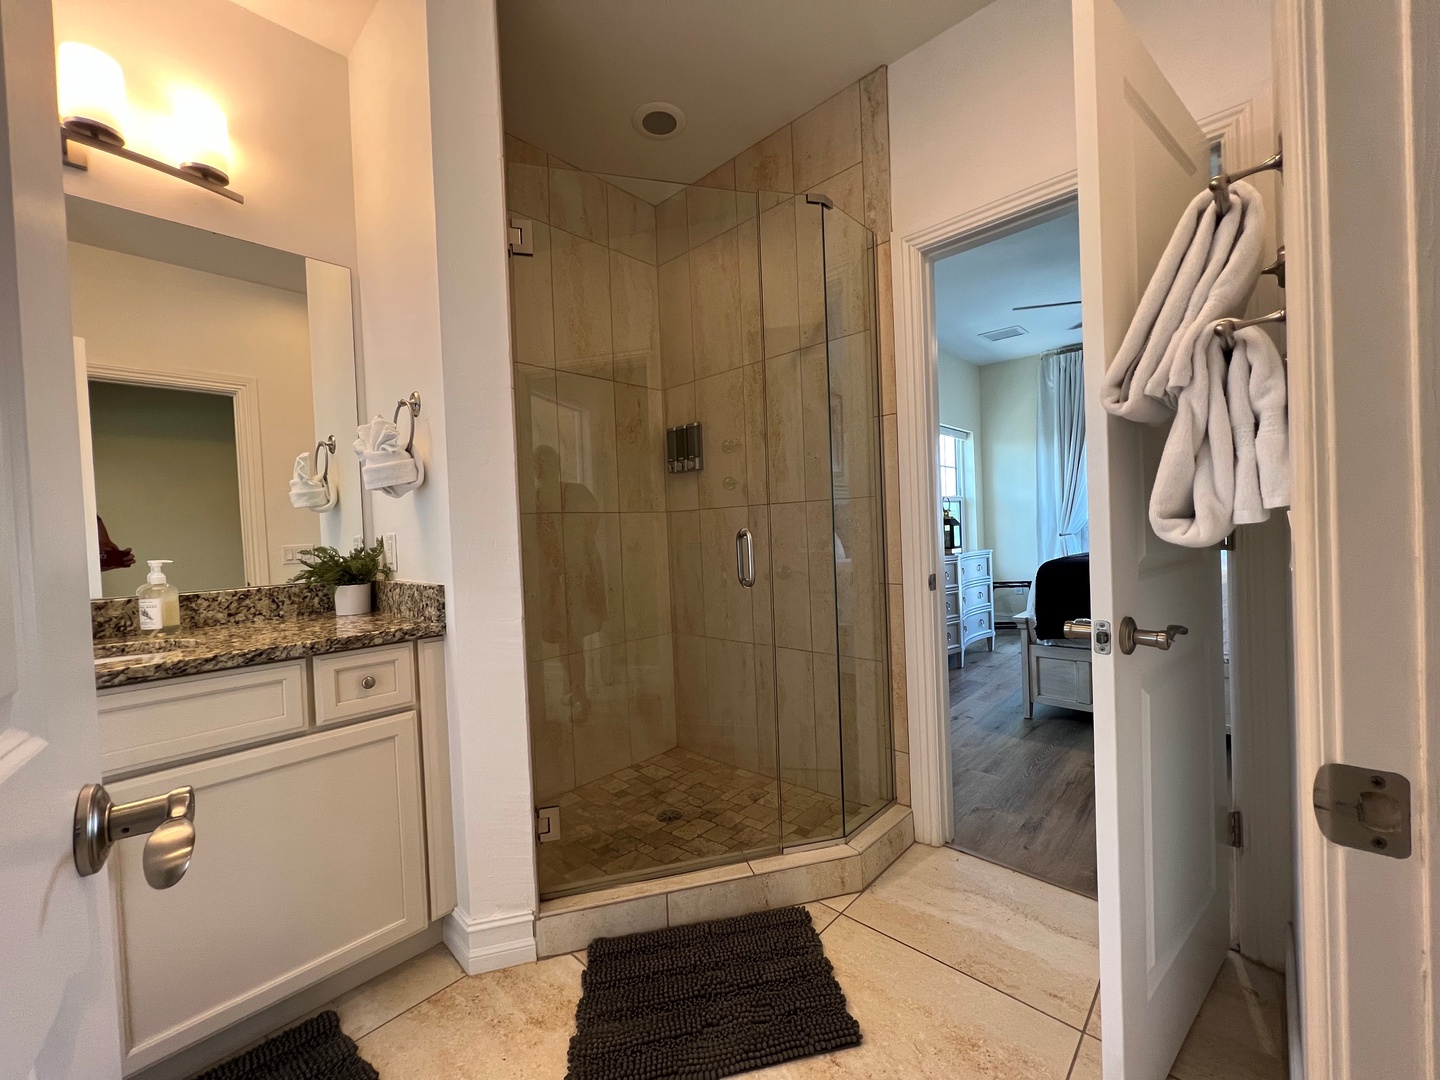 Third bathroom with stand up shower